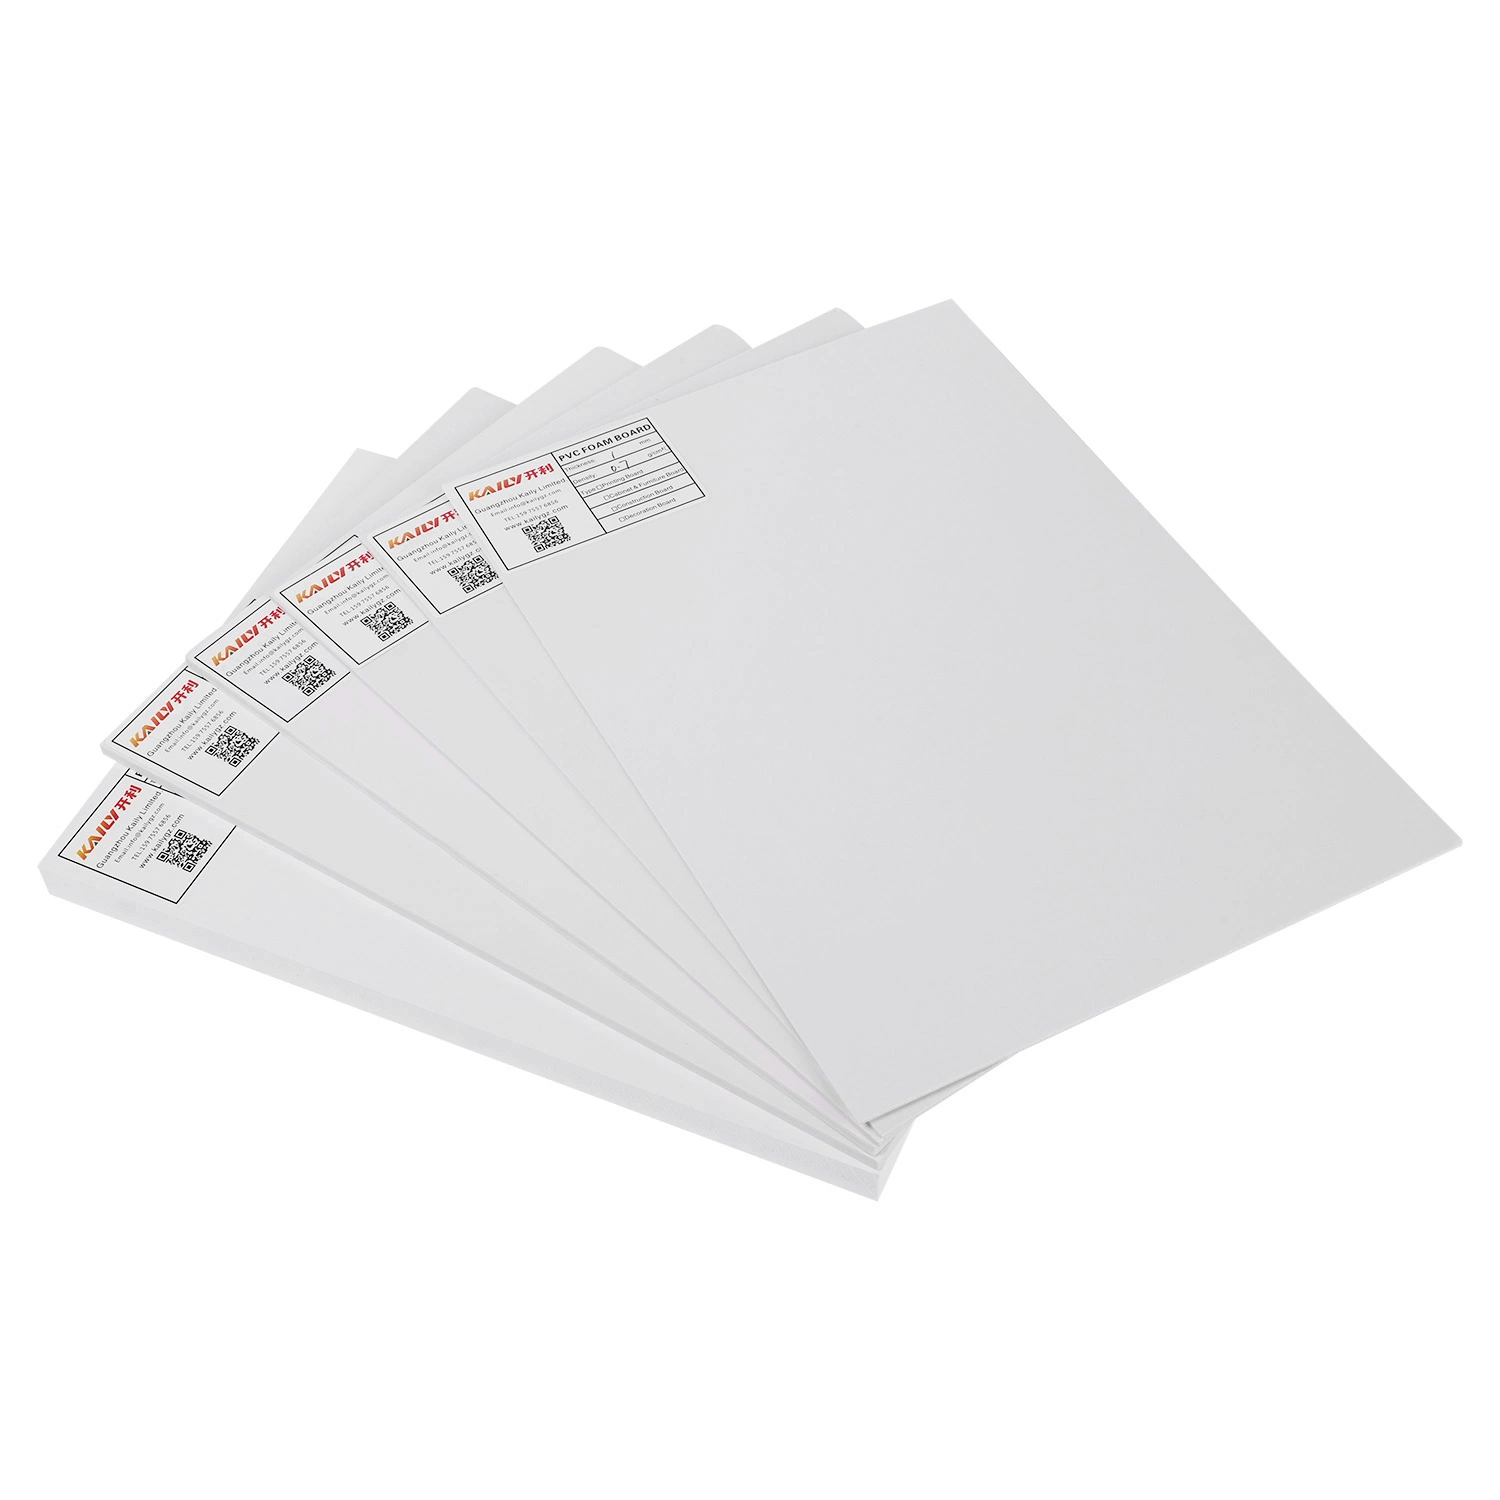 Kaily High-Quality Plastic Sheet PVC Free Foam Board with a High Impact Strength